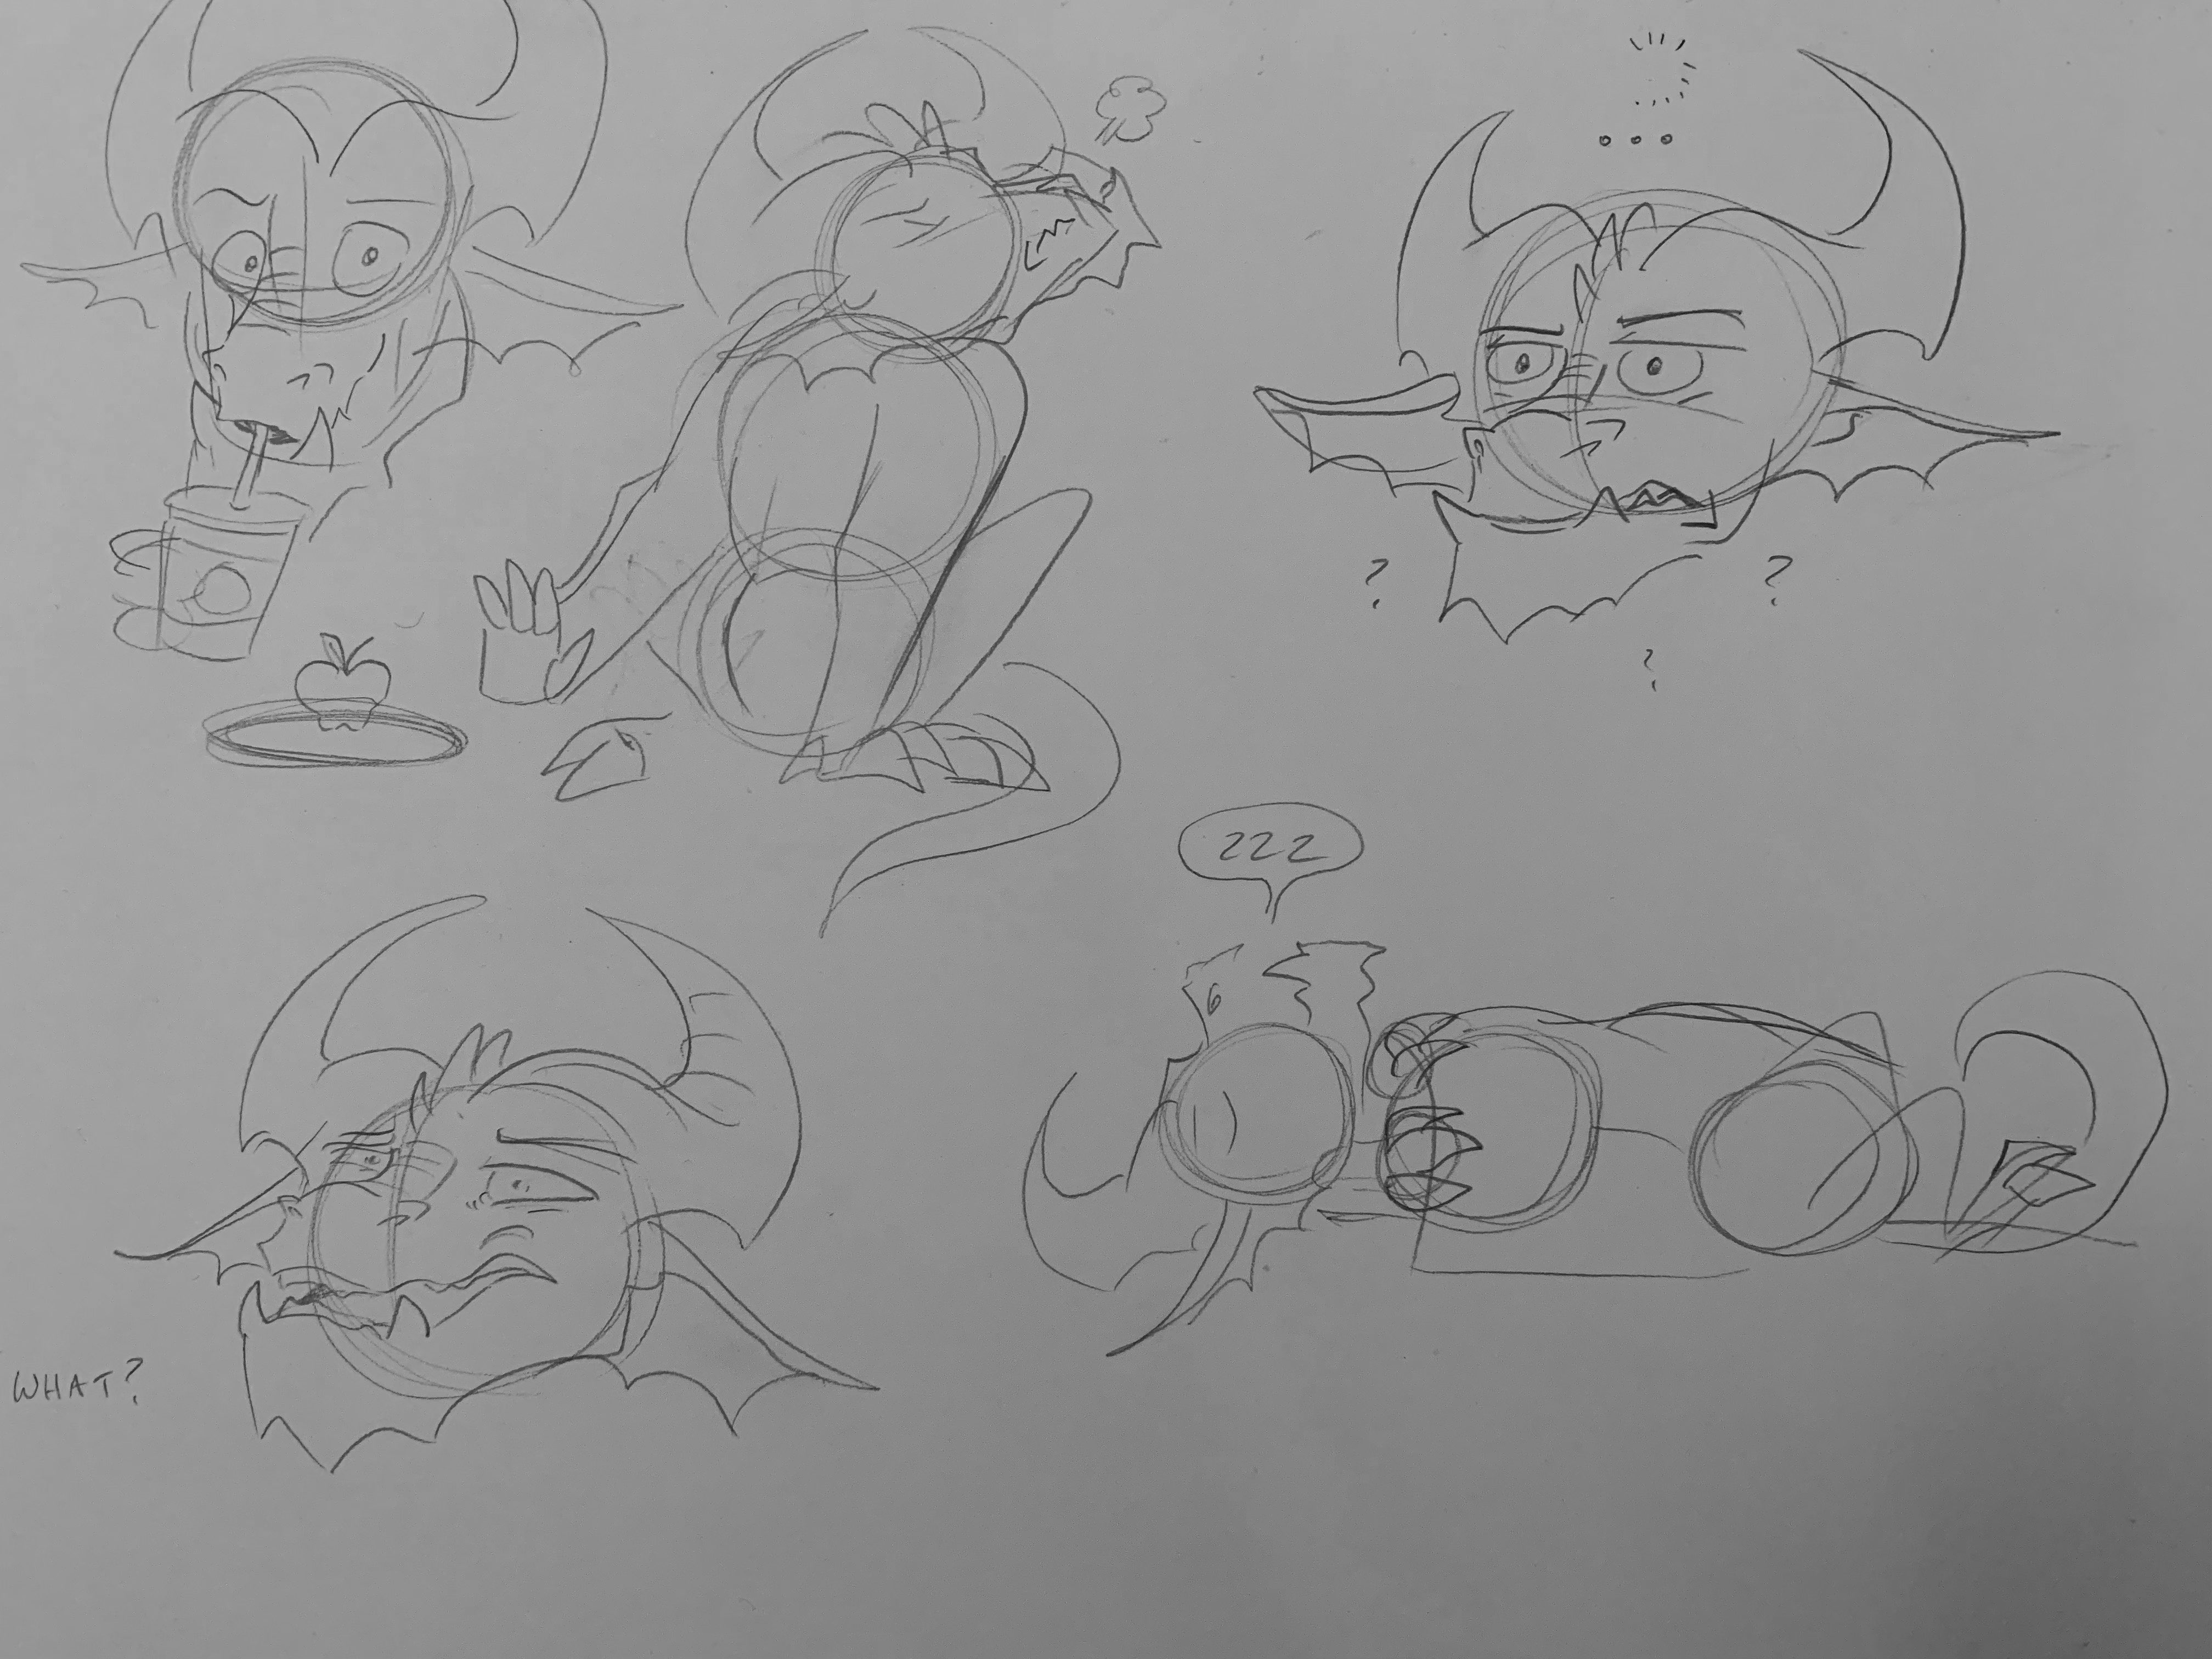 A collection of rough sketches.